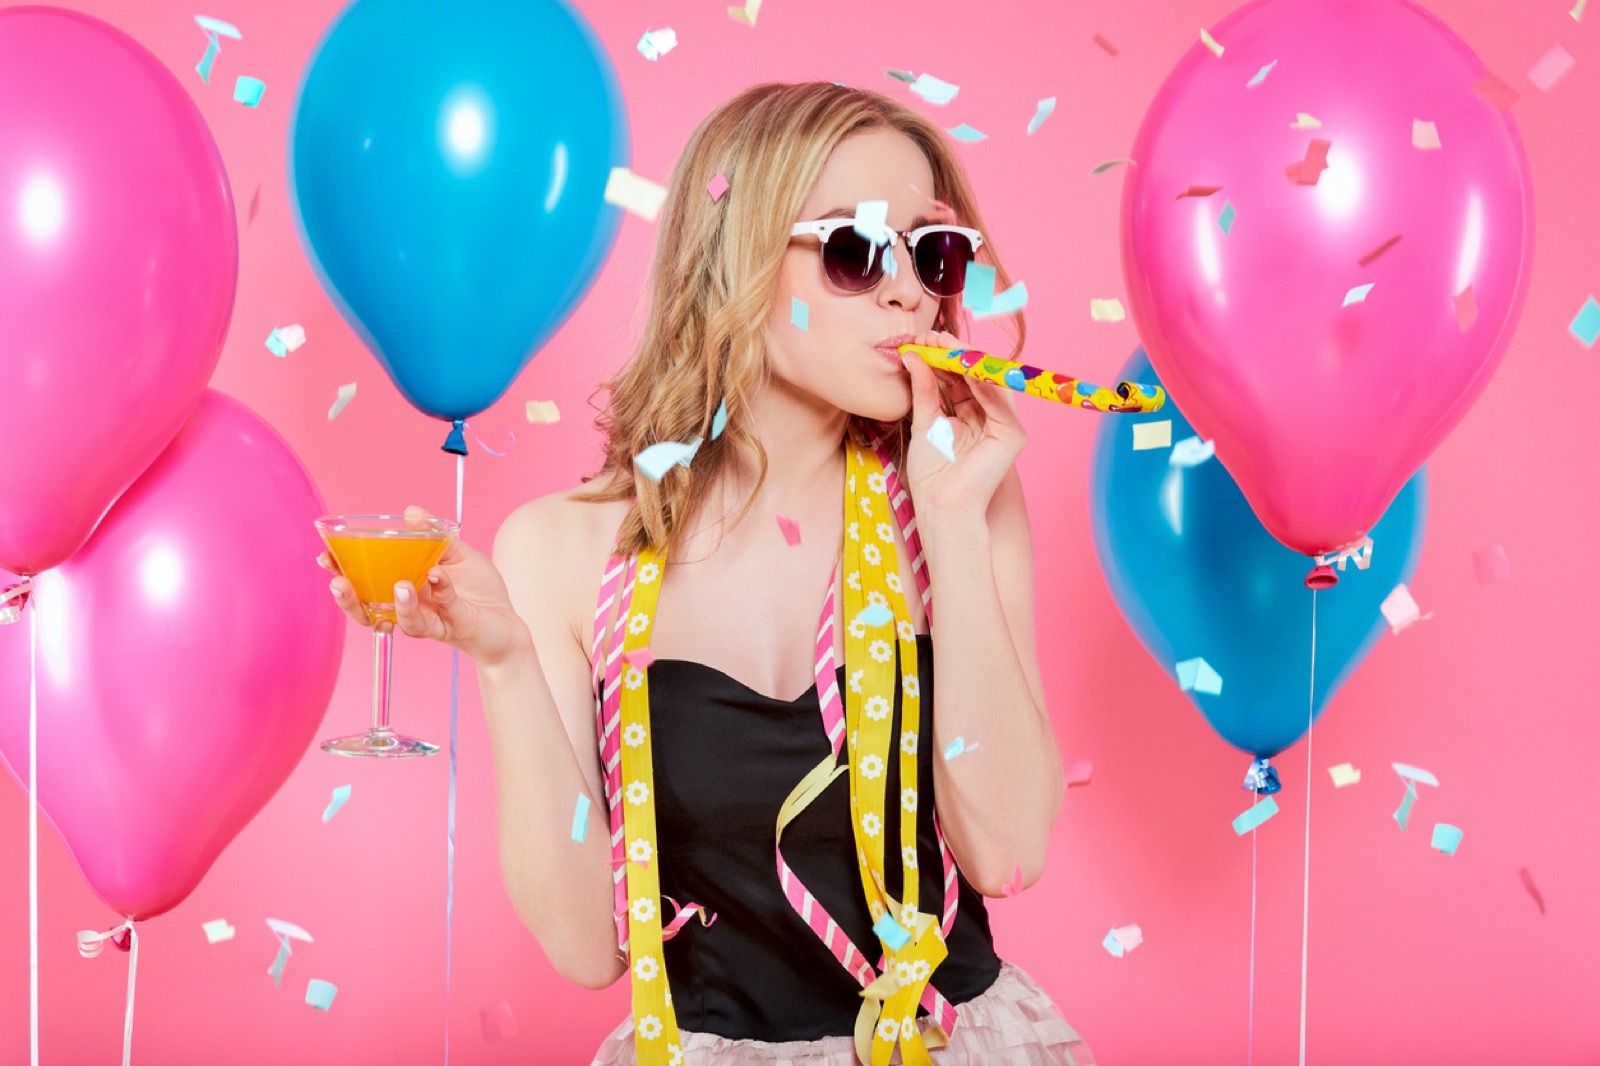 Which Classic Movie Monster Are You? Gorgeous Trendy Young Woman In Party Outfit Celebrating Birthday. Party Mood, Balloons, Noisemaker, Flying Confetti, Cocktail And Dancing Concept On Pastel Pink Background.